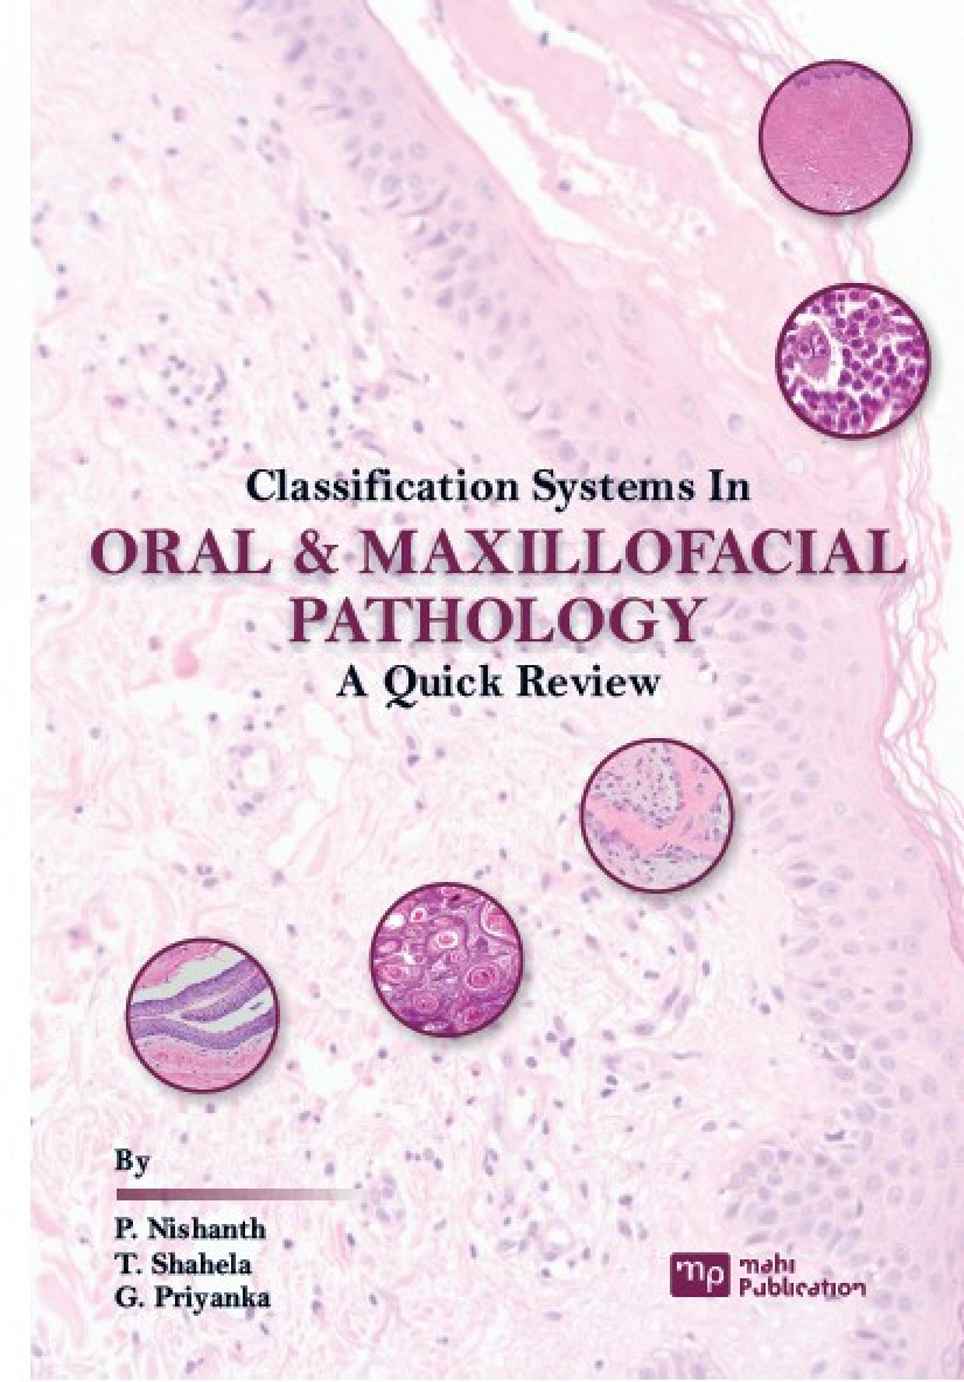 Classification Systems In Oral & MaXIllofacial Pathology A Quick Review